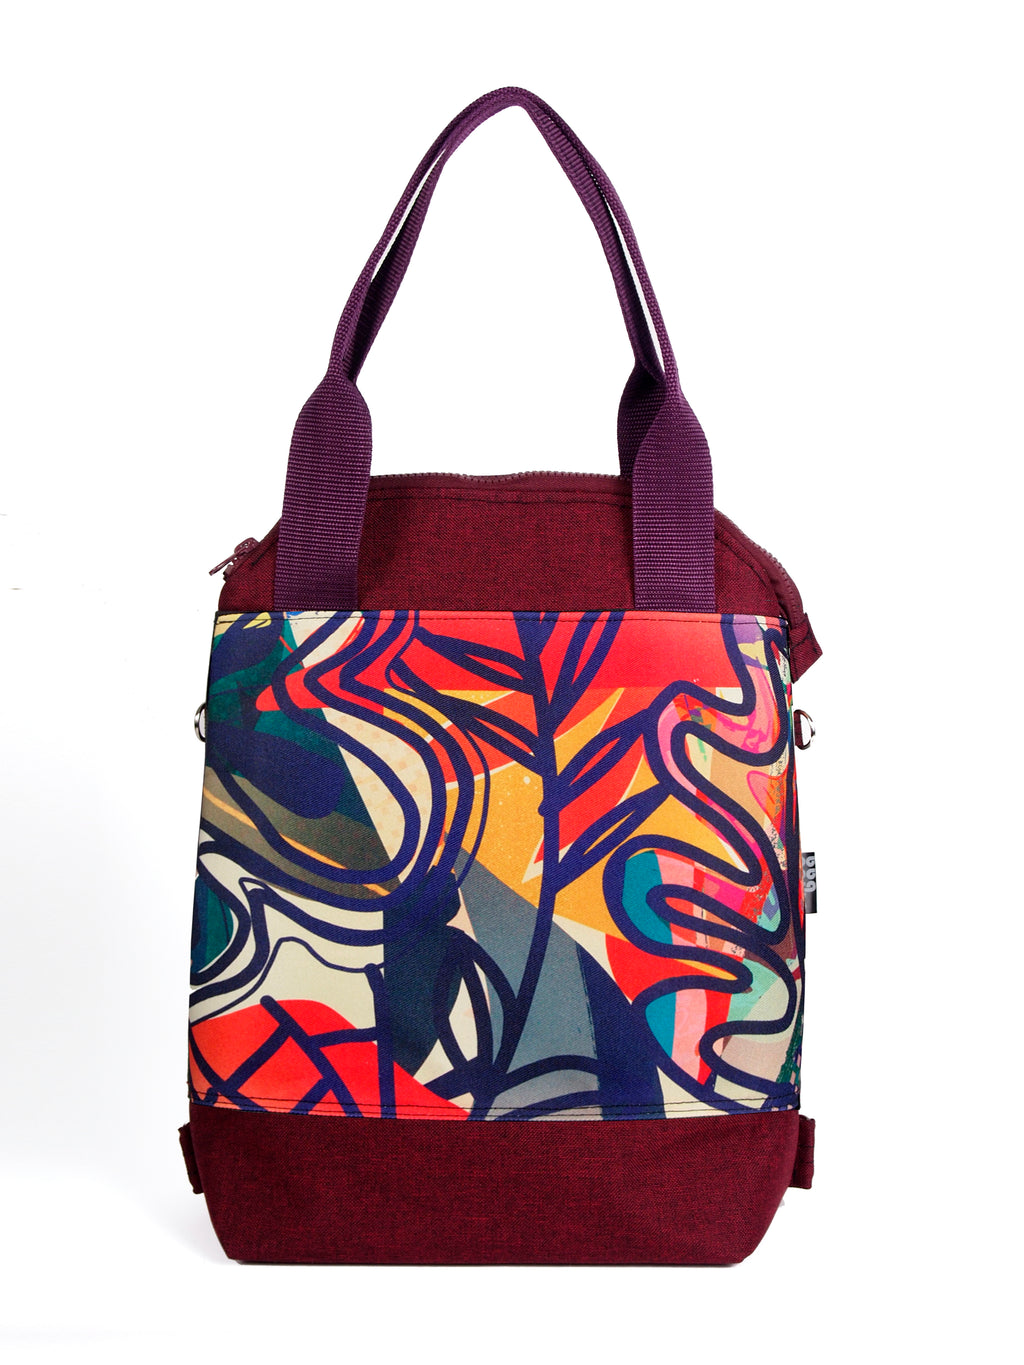 Bardo classic backpack textiles -  abstraction - Premium Textiles from BARDO ART WORKS - Just lvabstract, black, floral, handemade, leaves, tablet, urban style, woman, work bag89.00! Shop now at BARDO ART WORKS